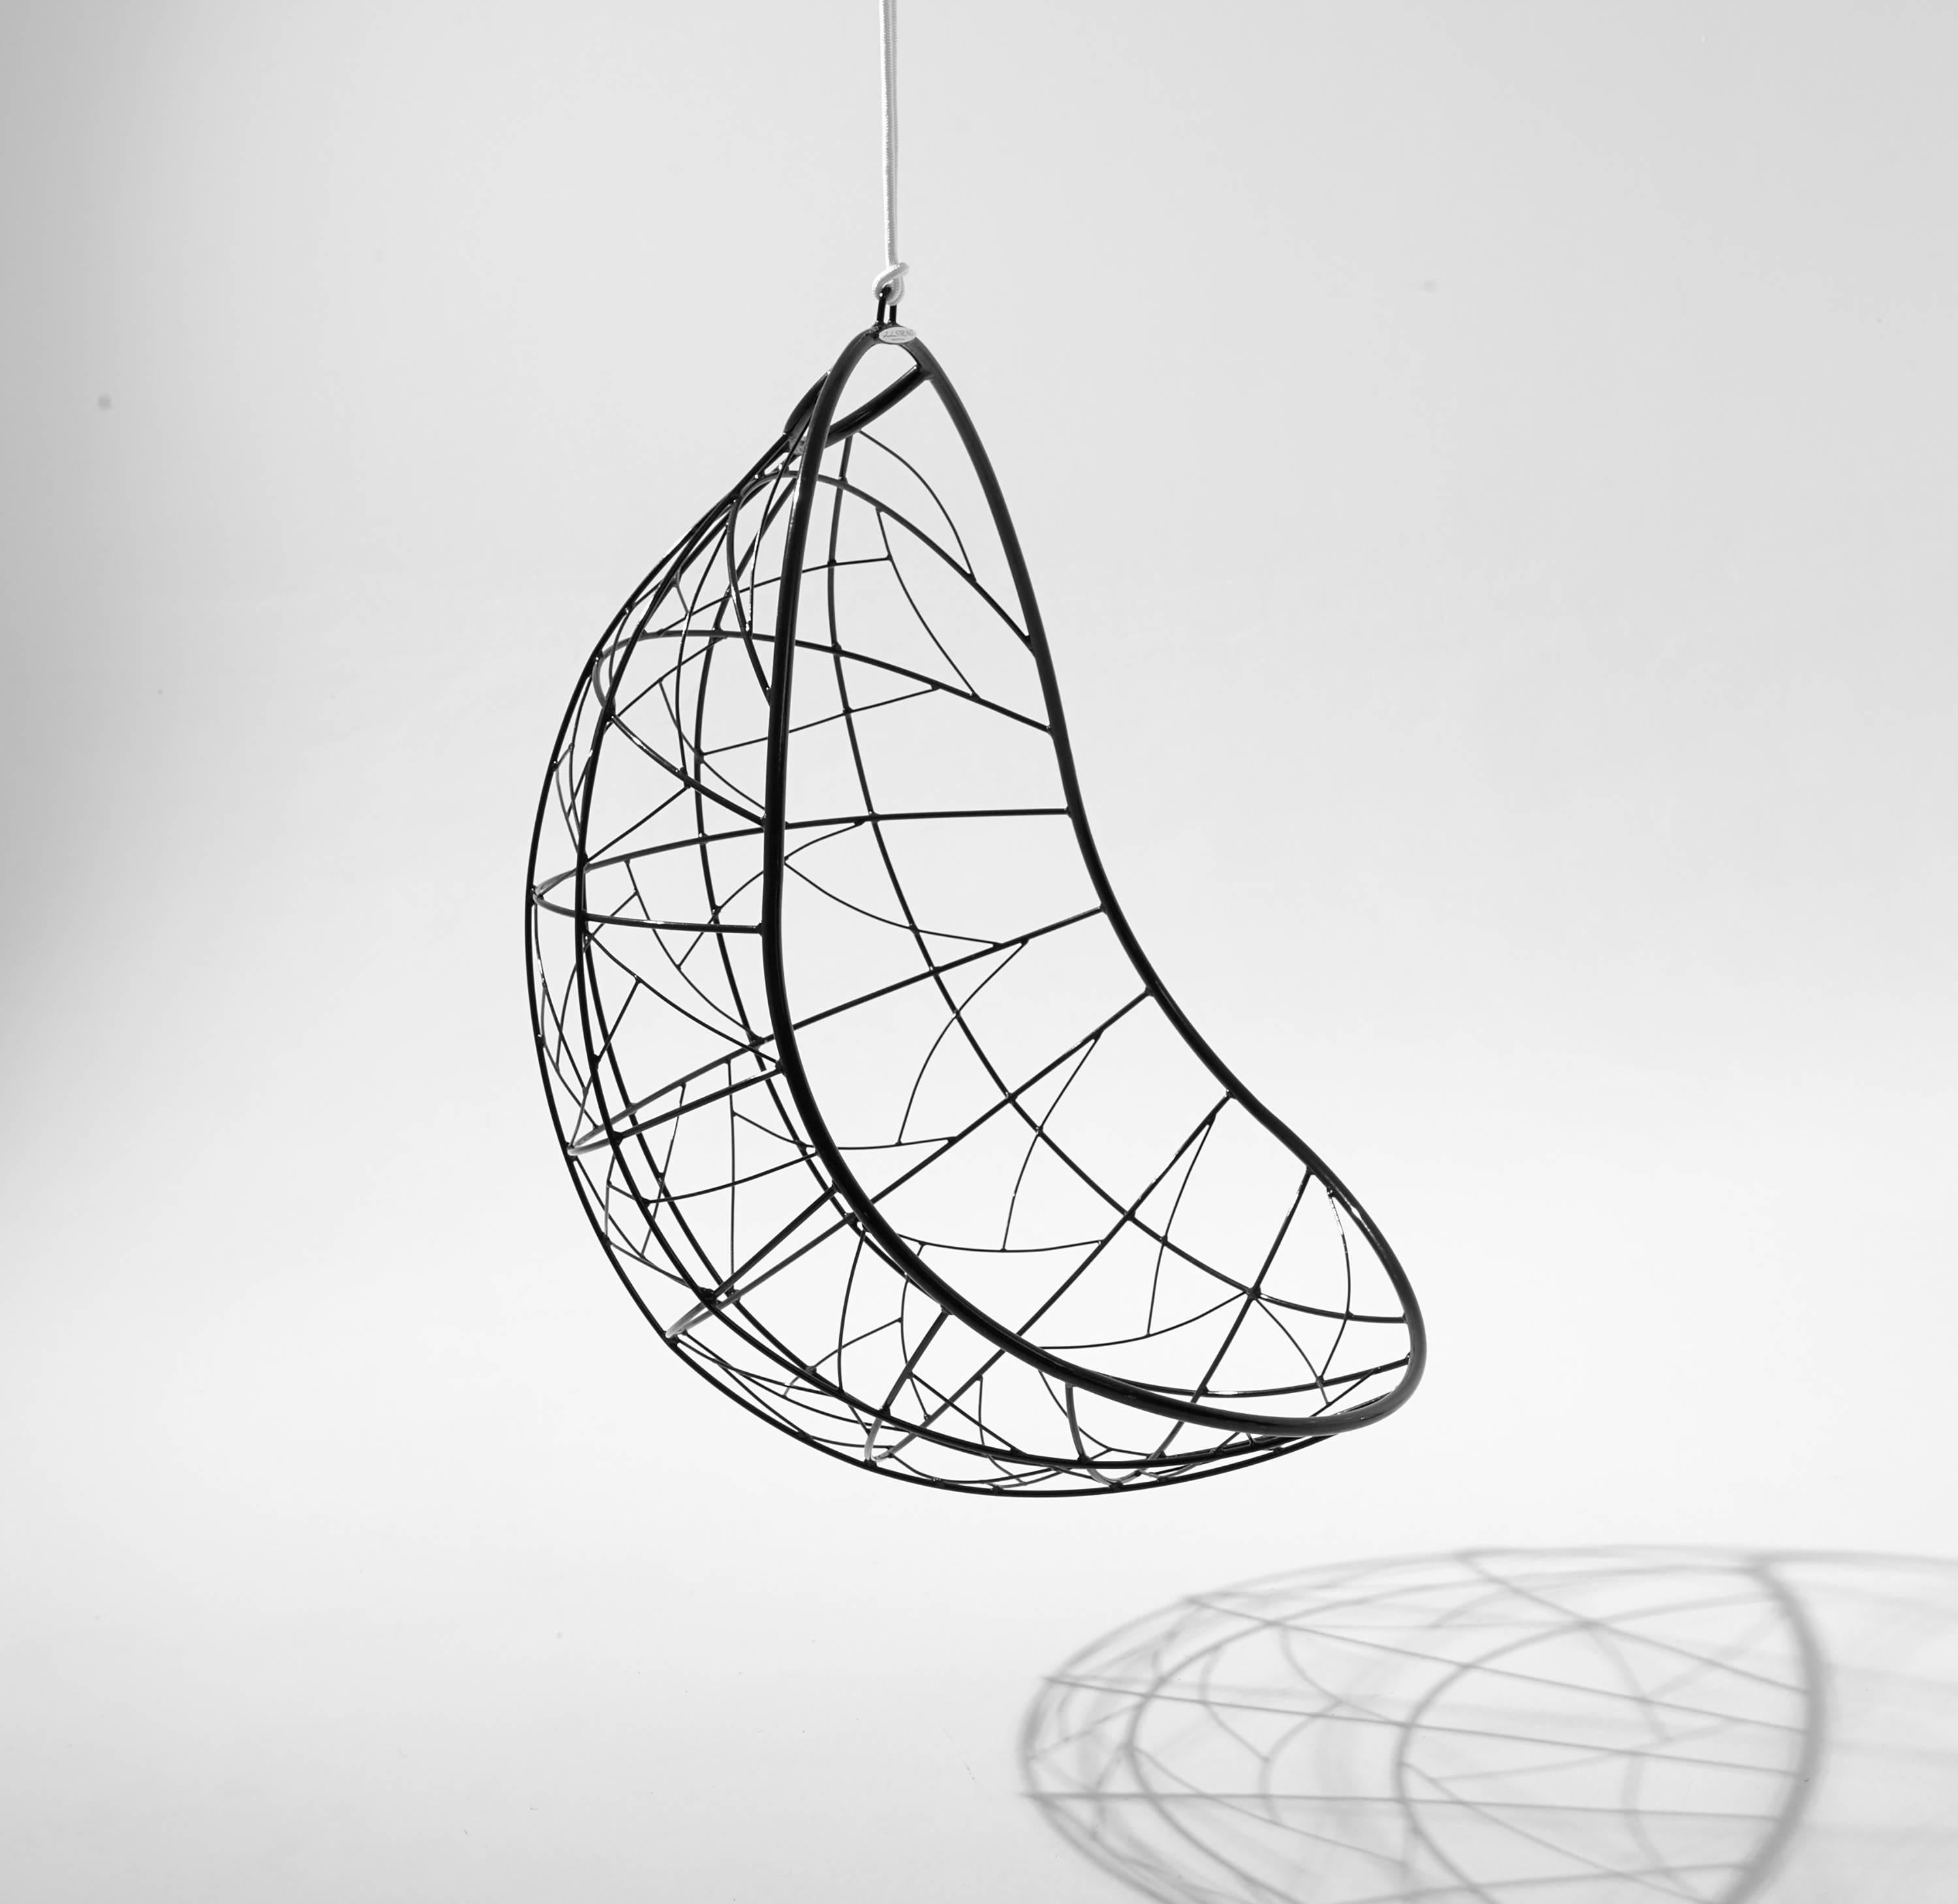 The Nest Egg hanging swing chair is inspired from the organic forms in bird nests and has a natural egg shape. The pattern detail is reminiscent of tree branches that intersect, grasses that are intertwined, the veins in dragonfly wings, veins in